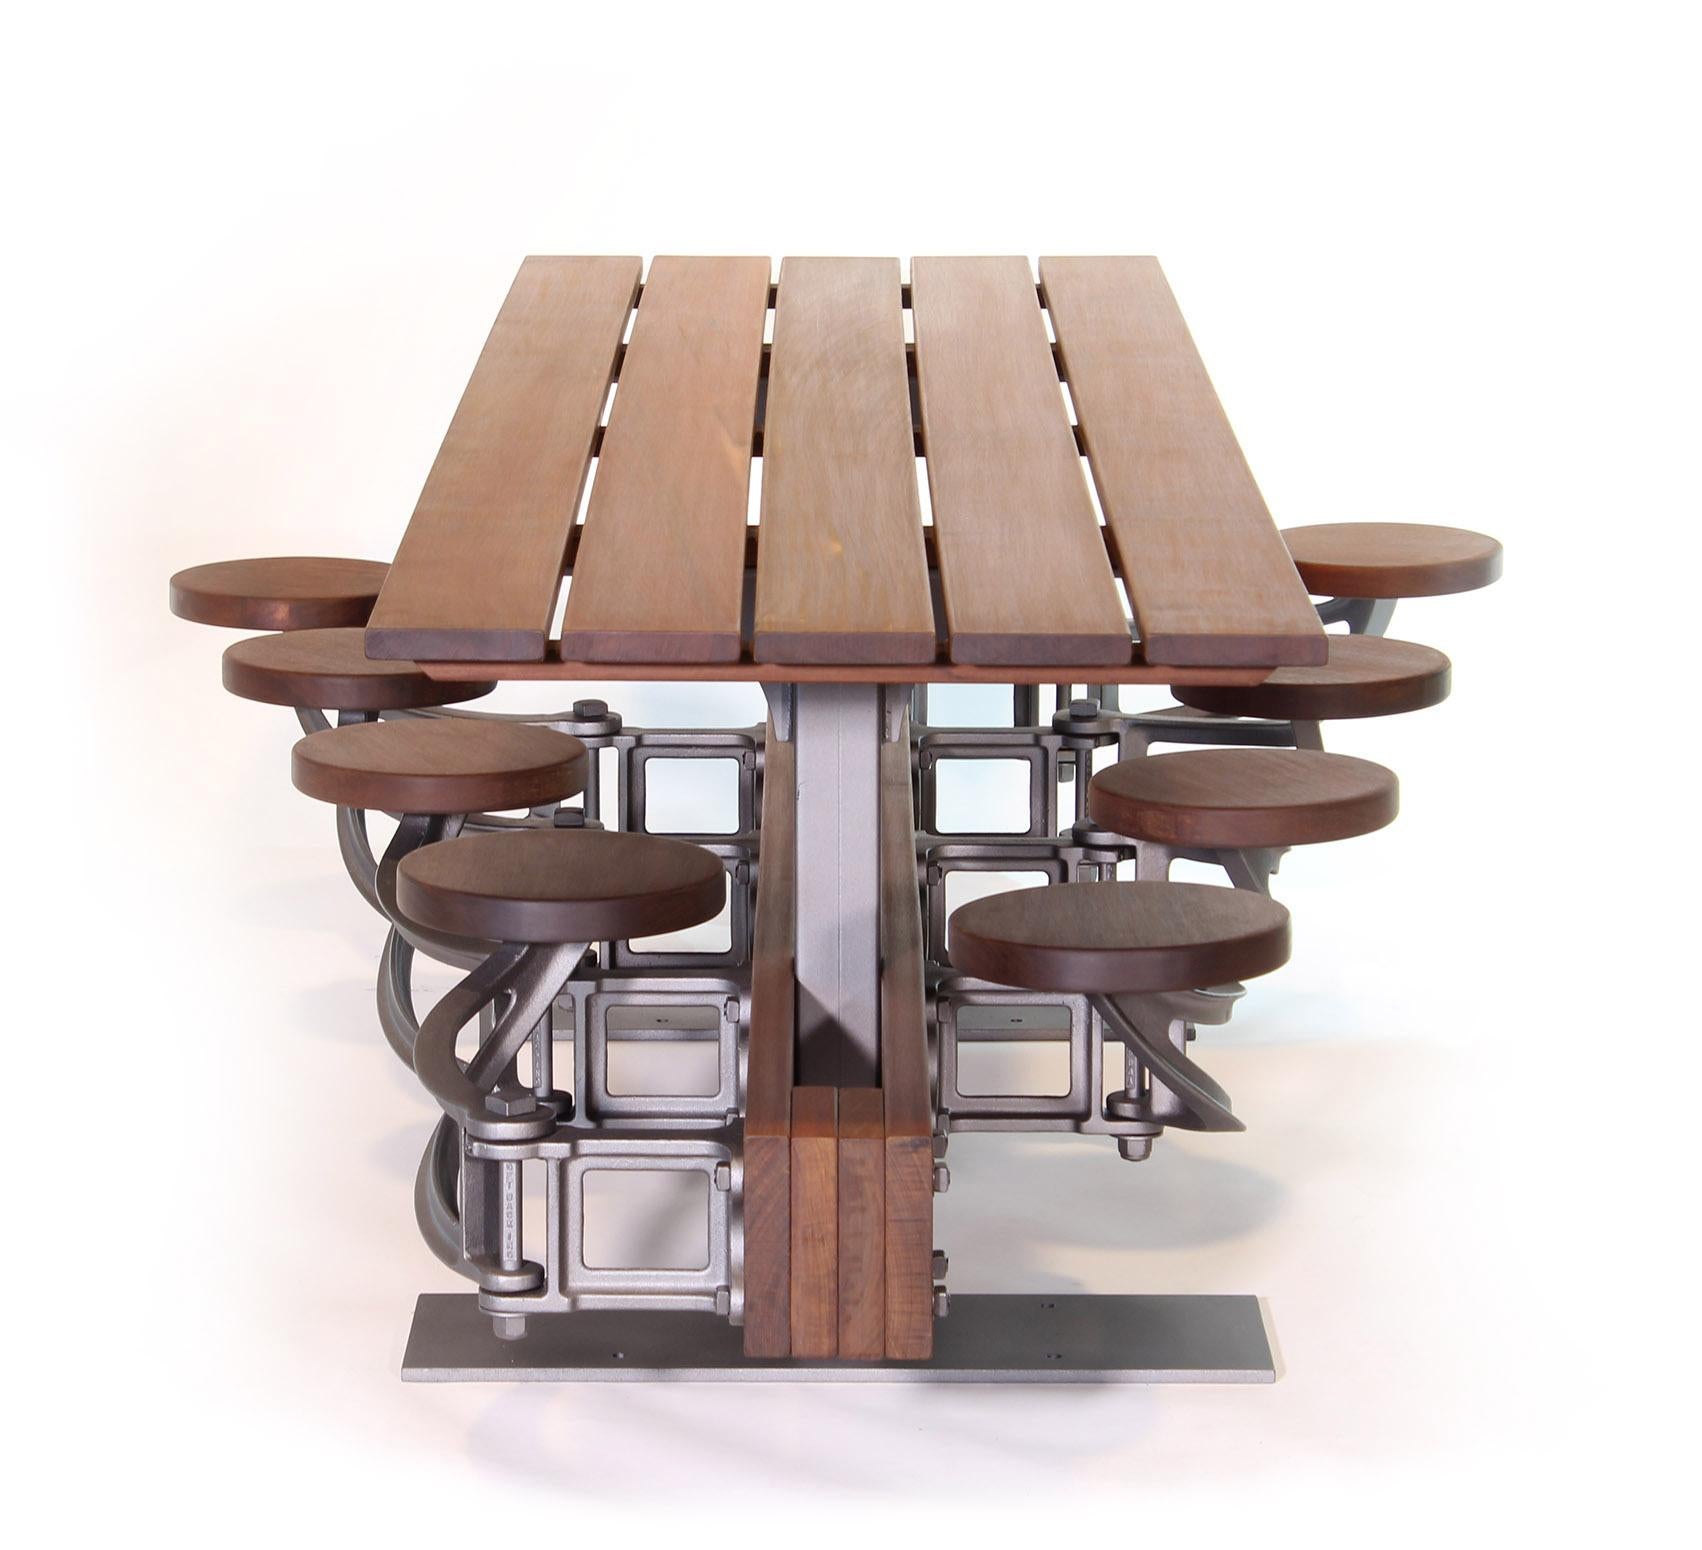 Picnic Table, Outdoor Patio Dining Table with Swing Out Seats 8